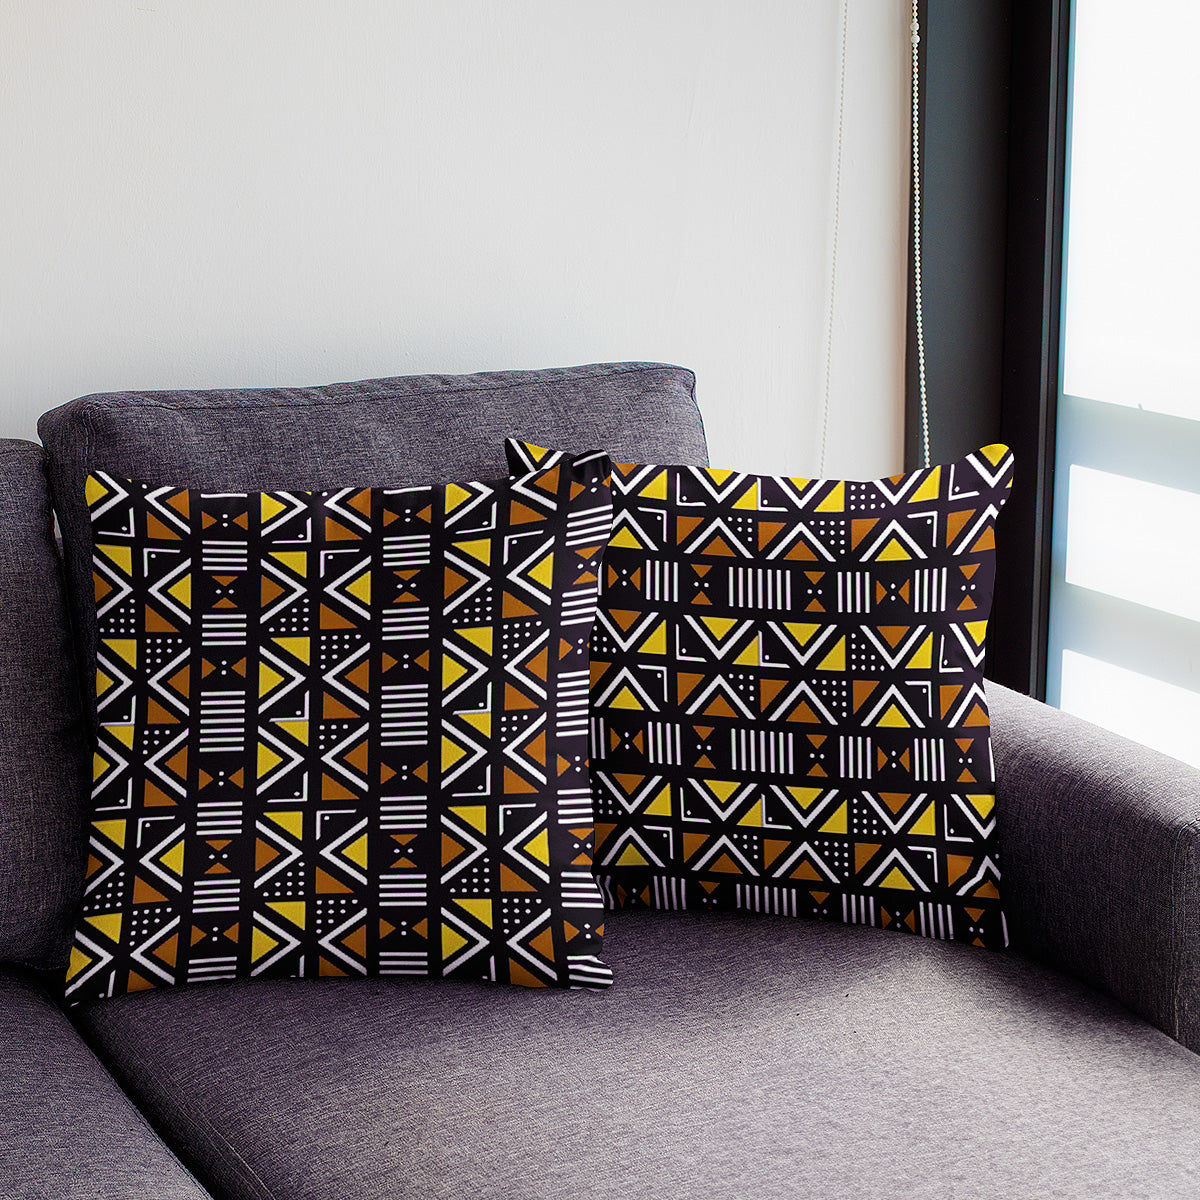 2 Sets of Tribal Cushion Pillow Case Throw Cover- Bynelo